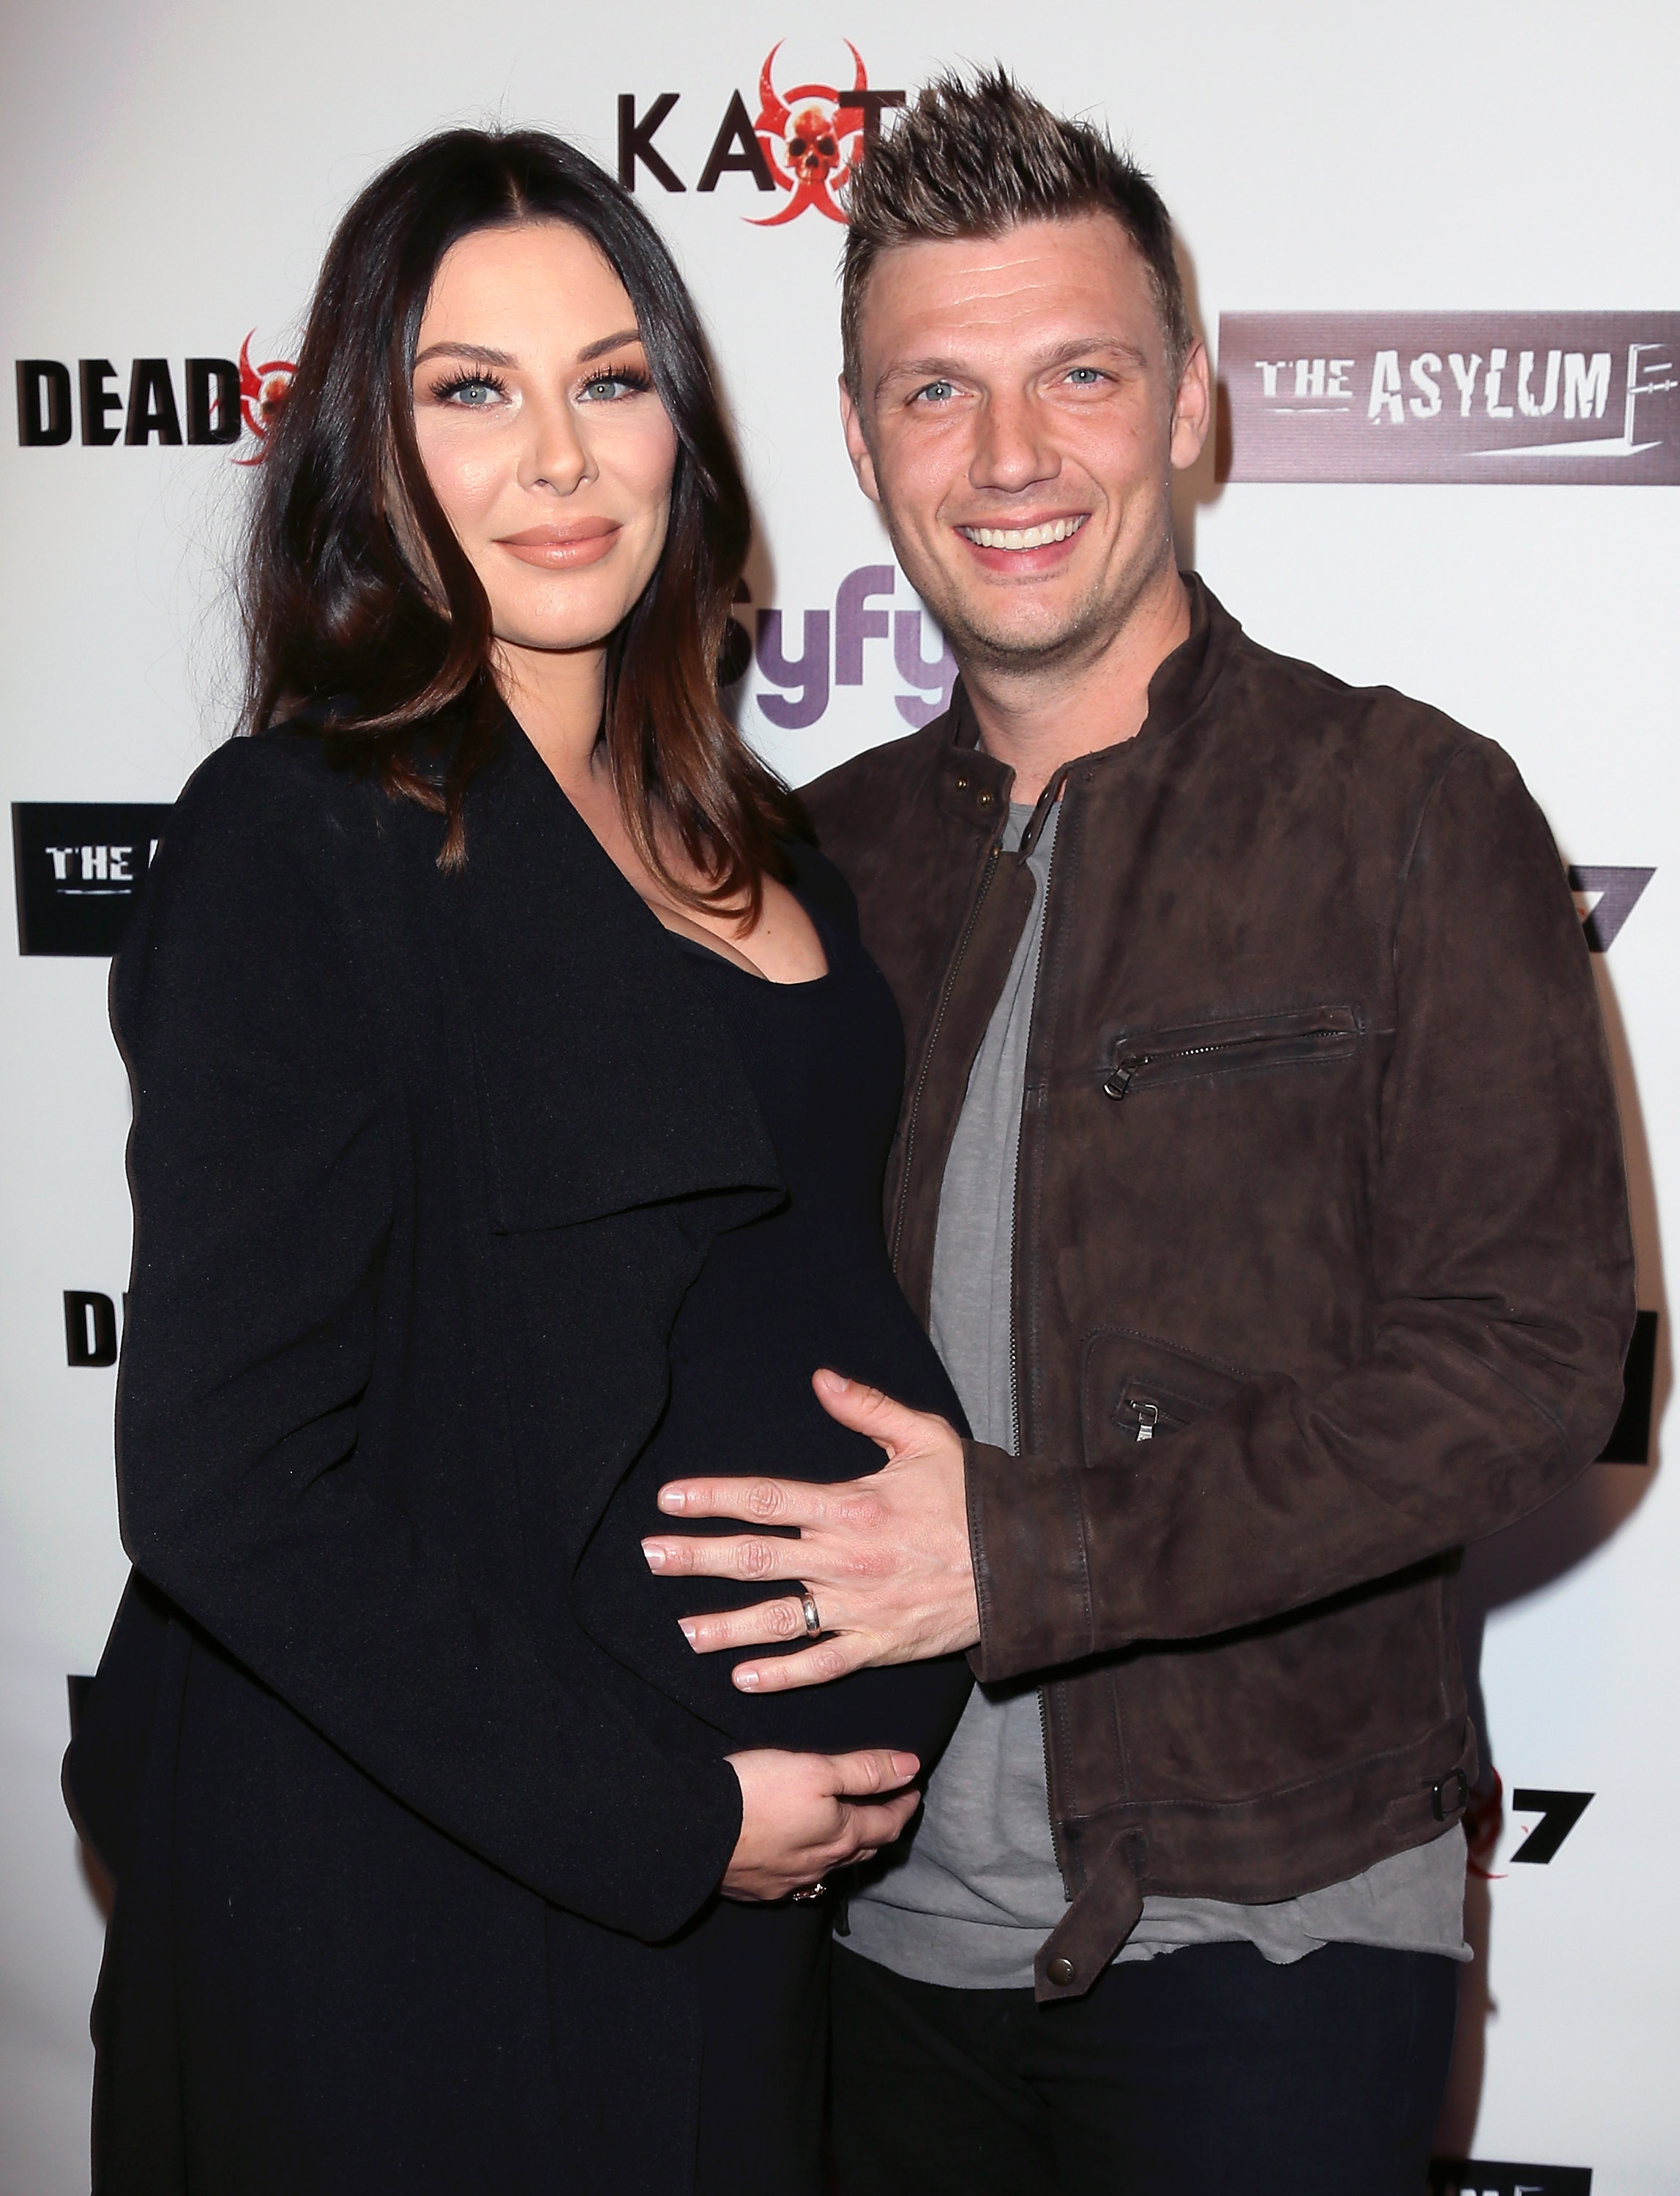 Nick and Lauren Kitt Carter at the premiere of "Dead 7" on April 1, 2016, in Los Angeles, California. | Source: Getty Images